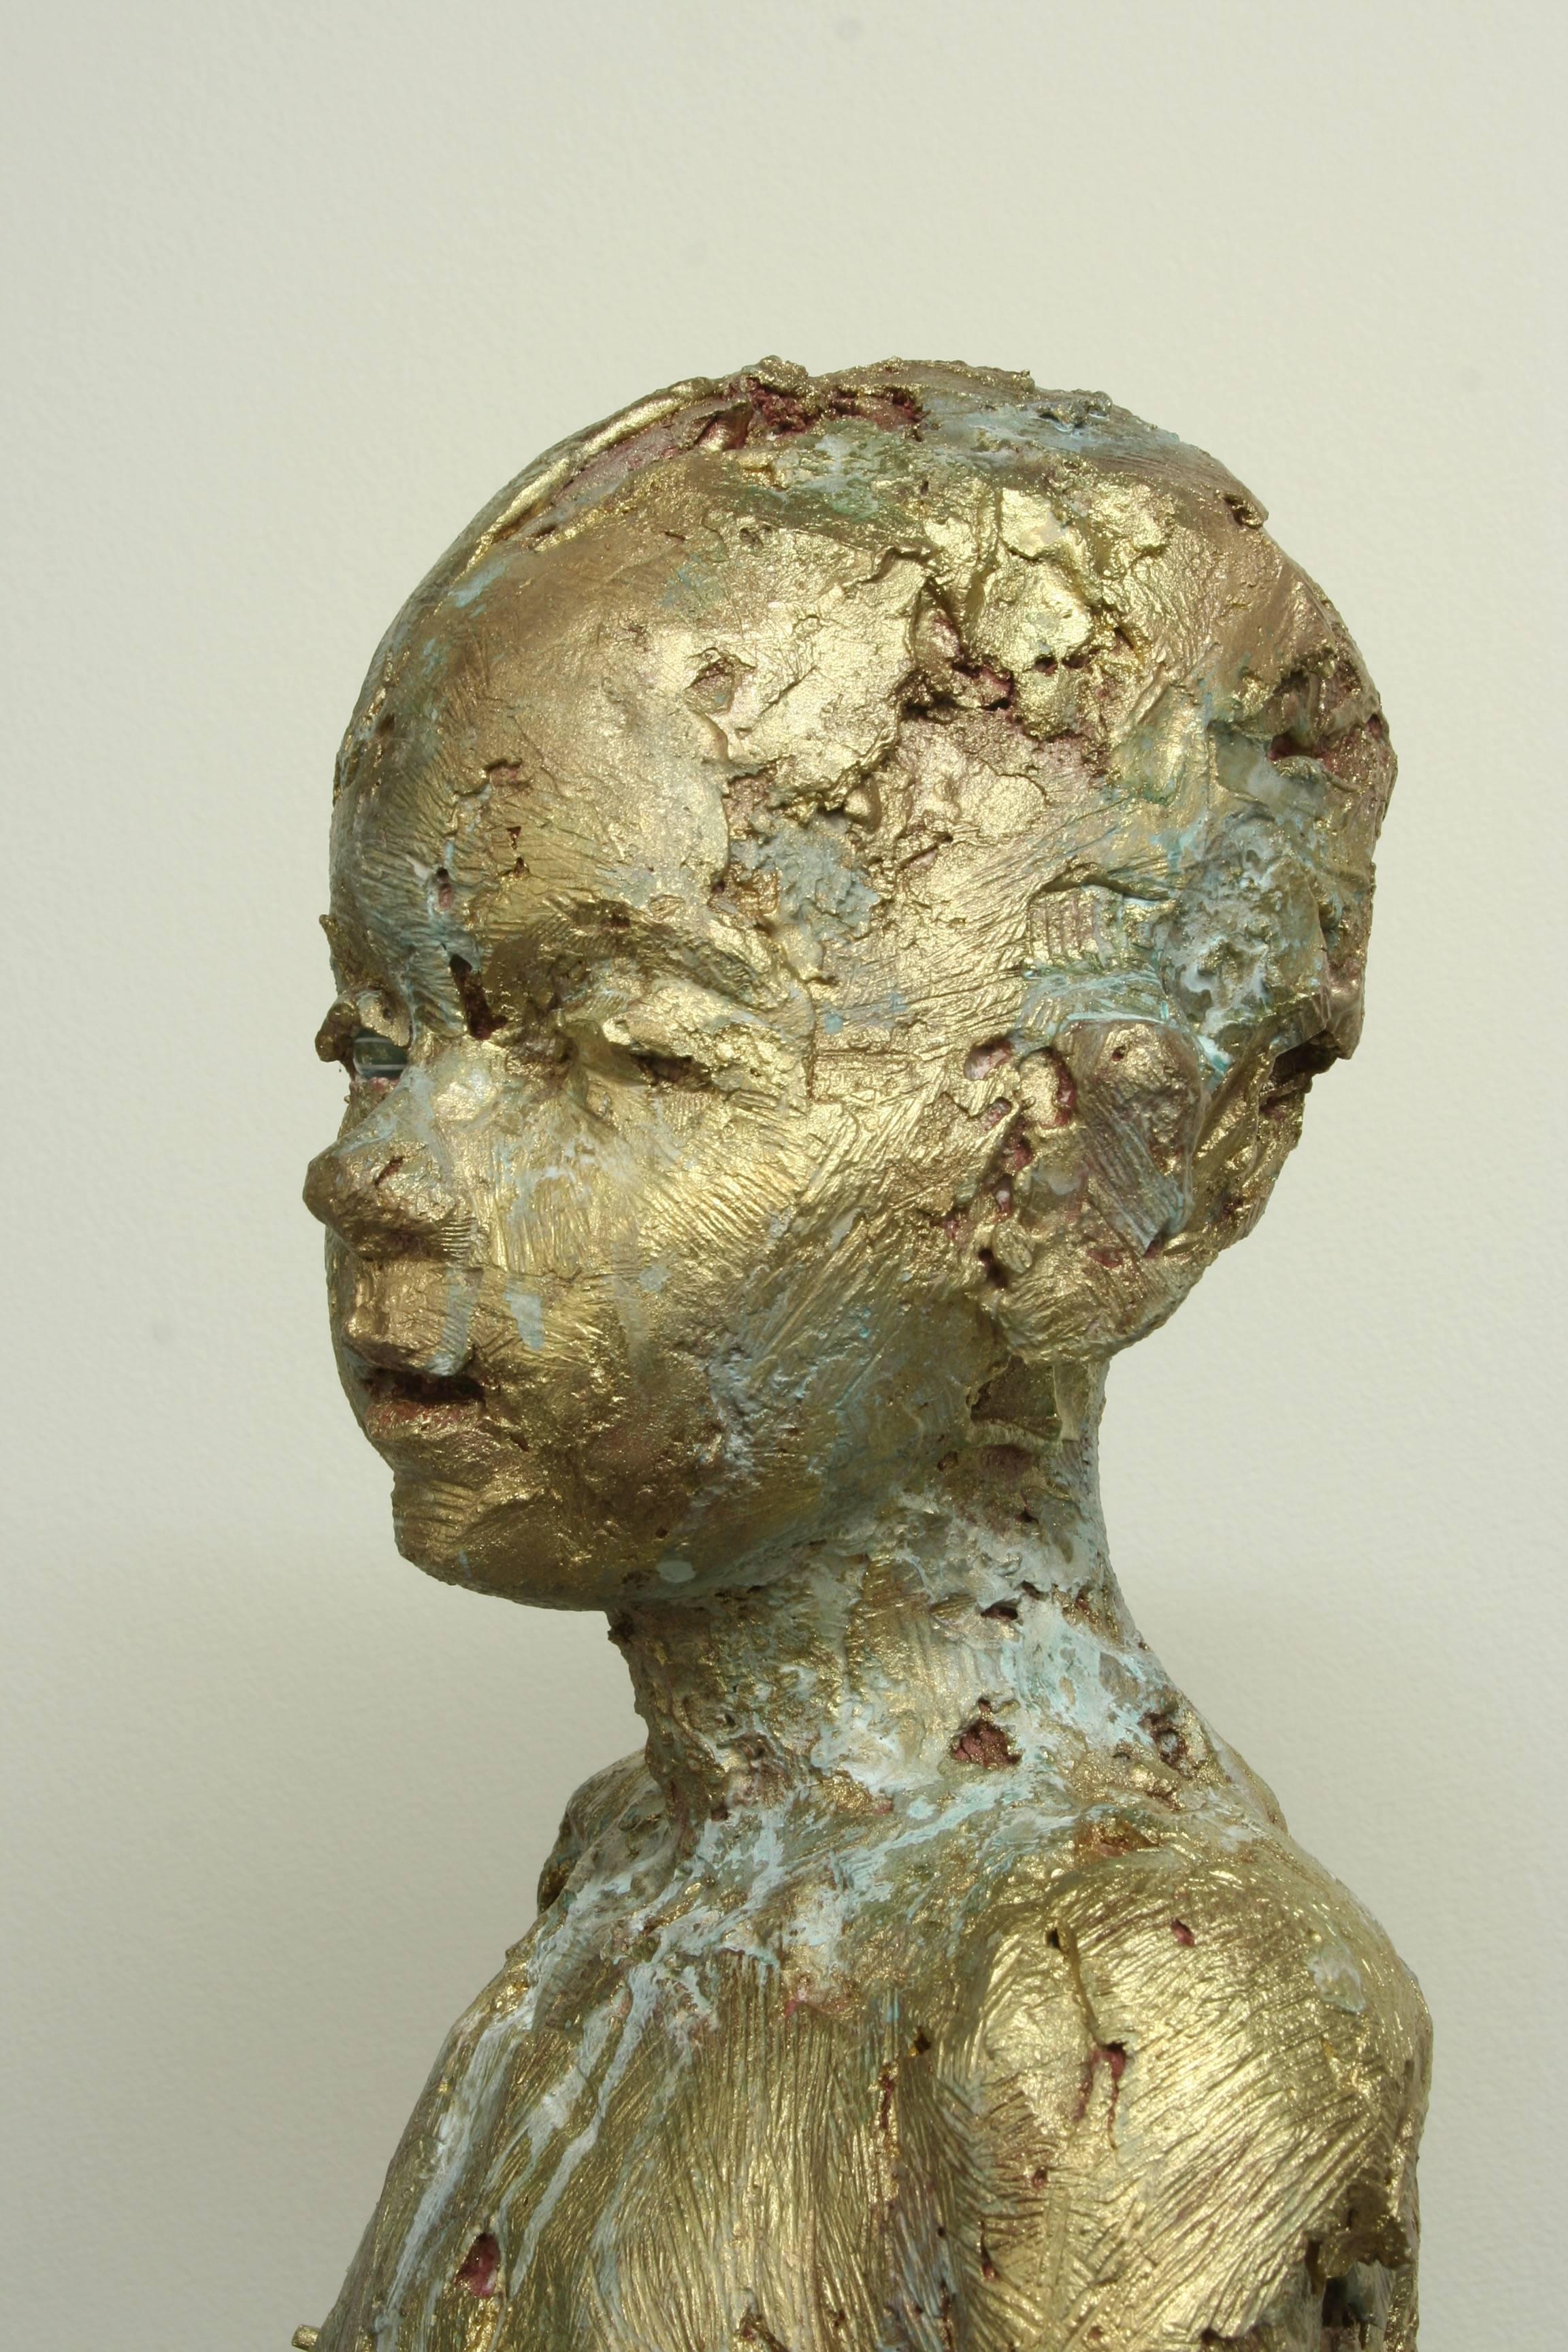 Changeling, a unique sculpture modeled in direct plaster and patinated a pale, golden color, explores the fleeting nature of childhood.